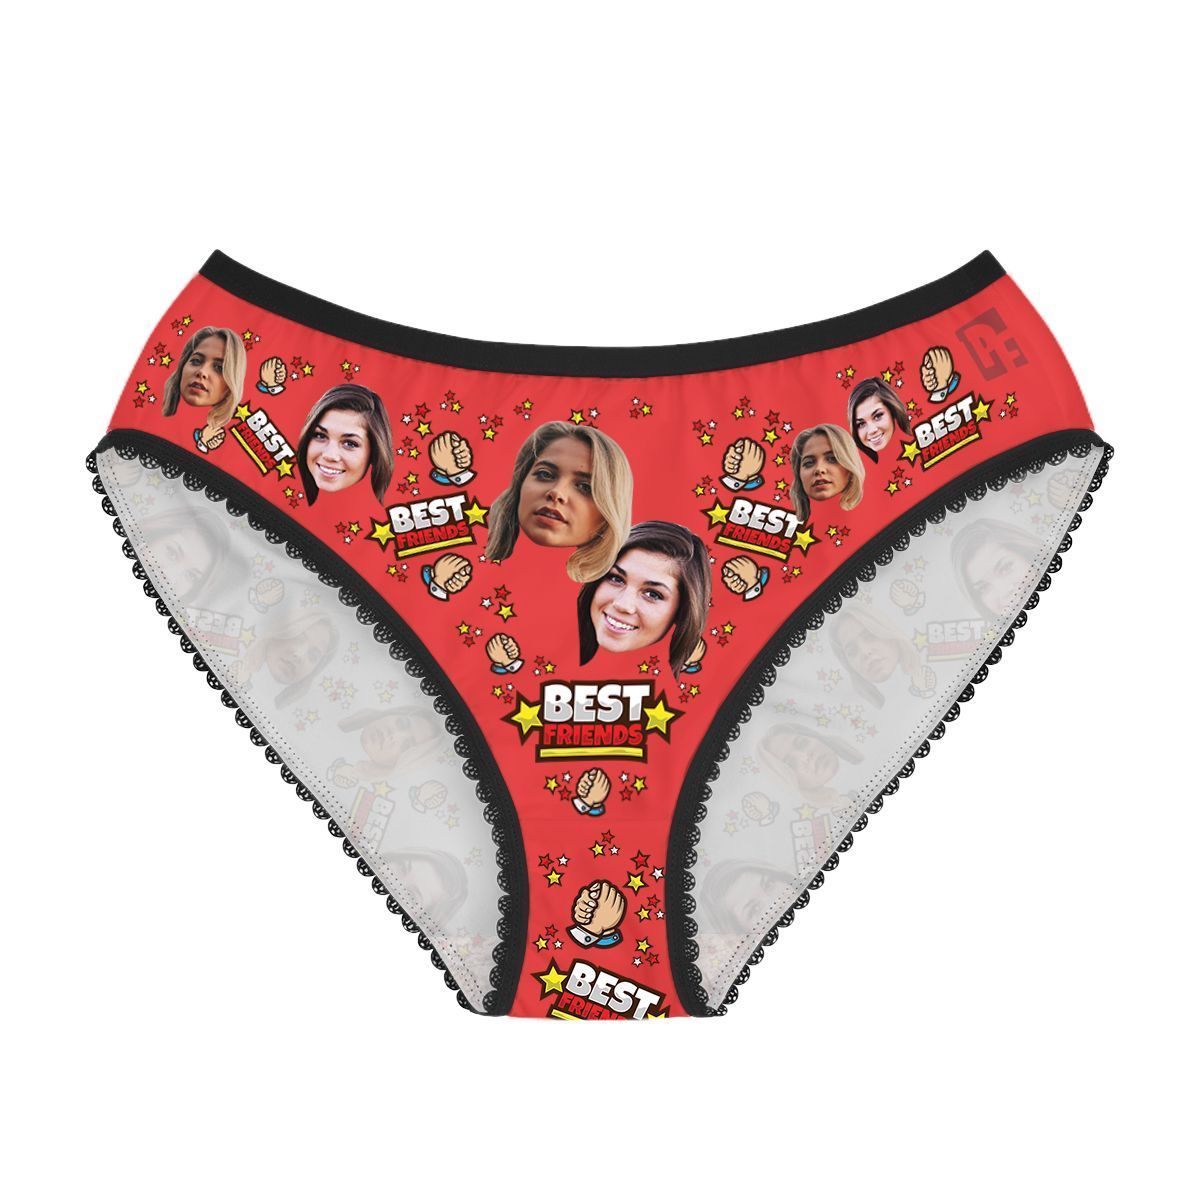 Red Best Friends women's underwear briefs personalized with photo printed on them